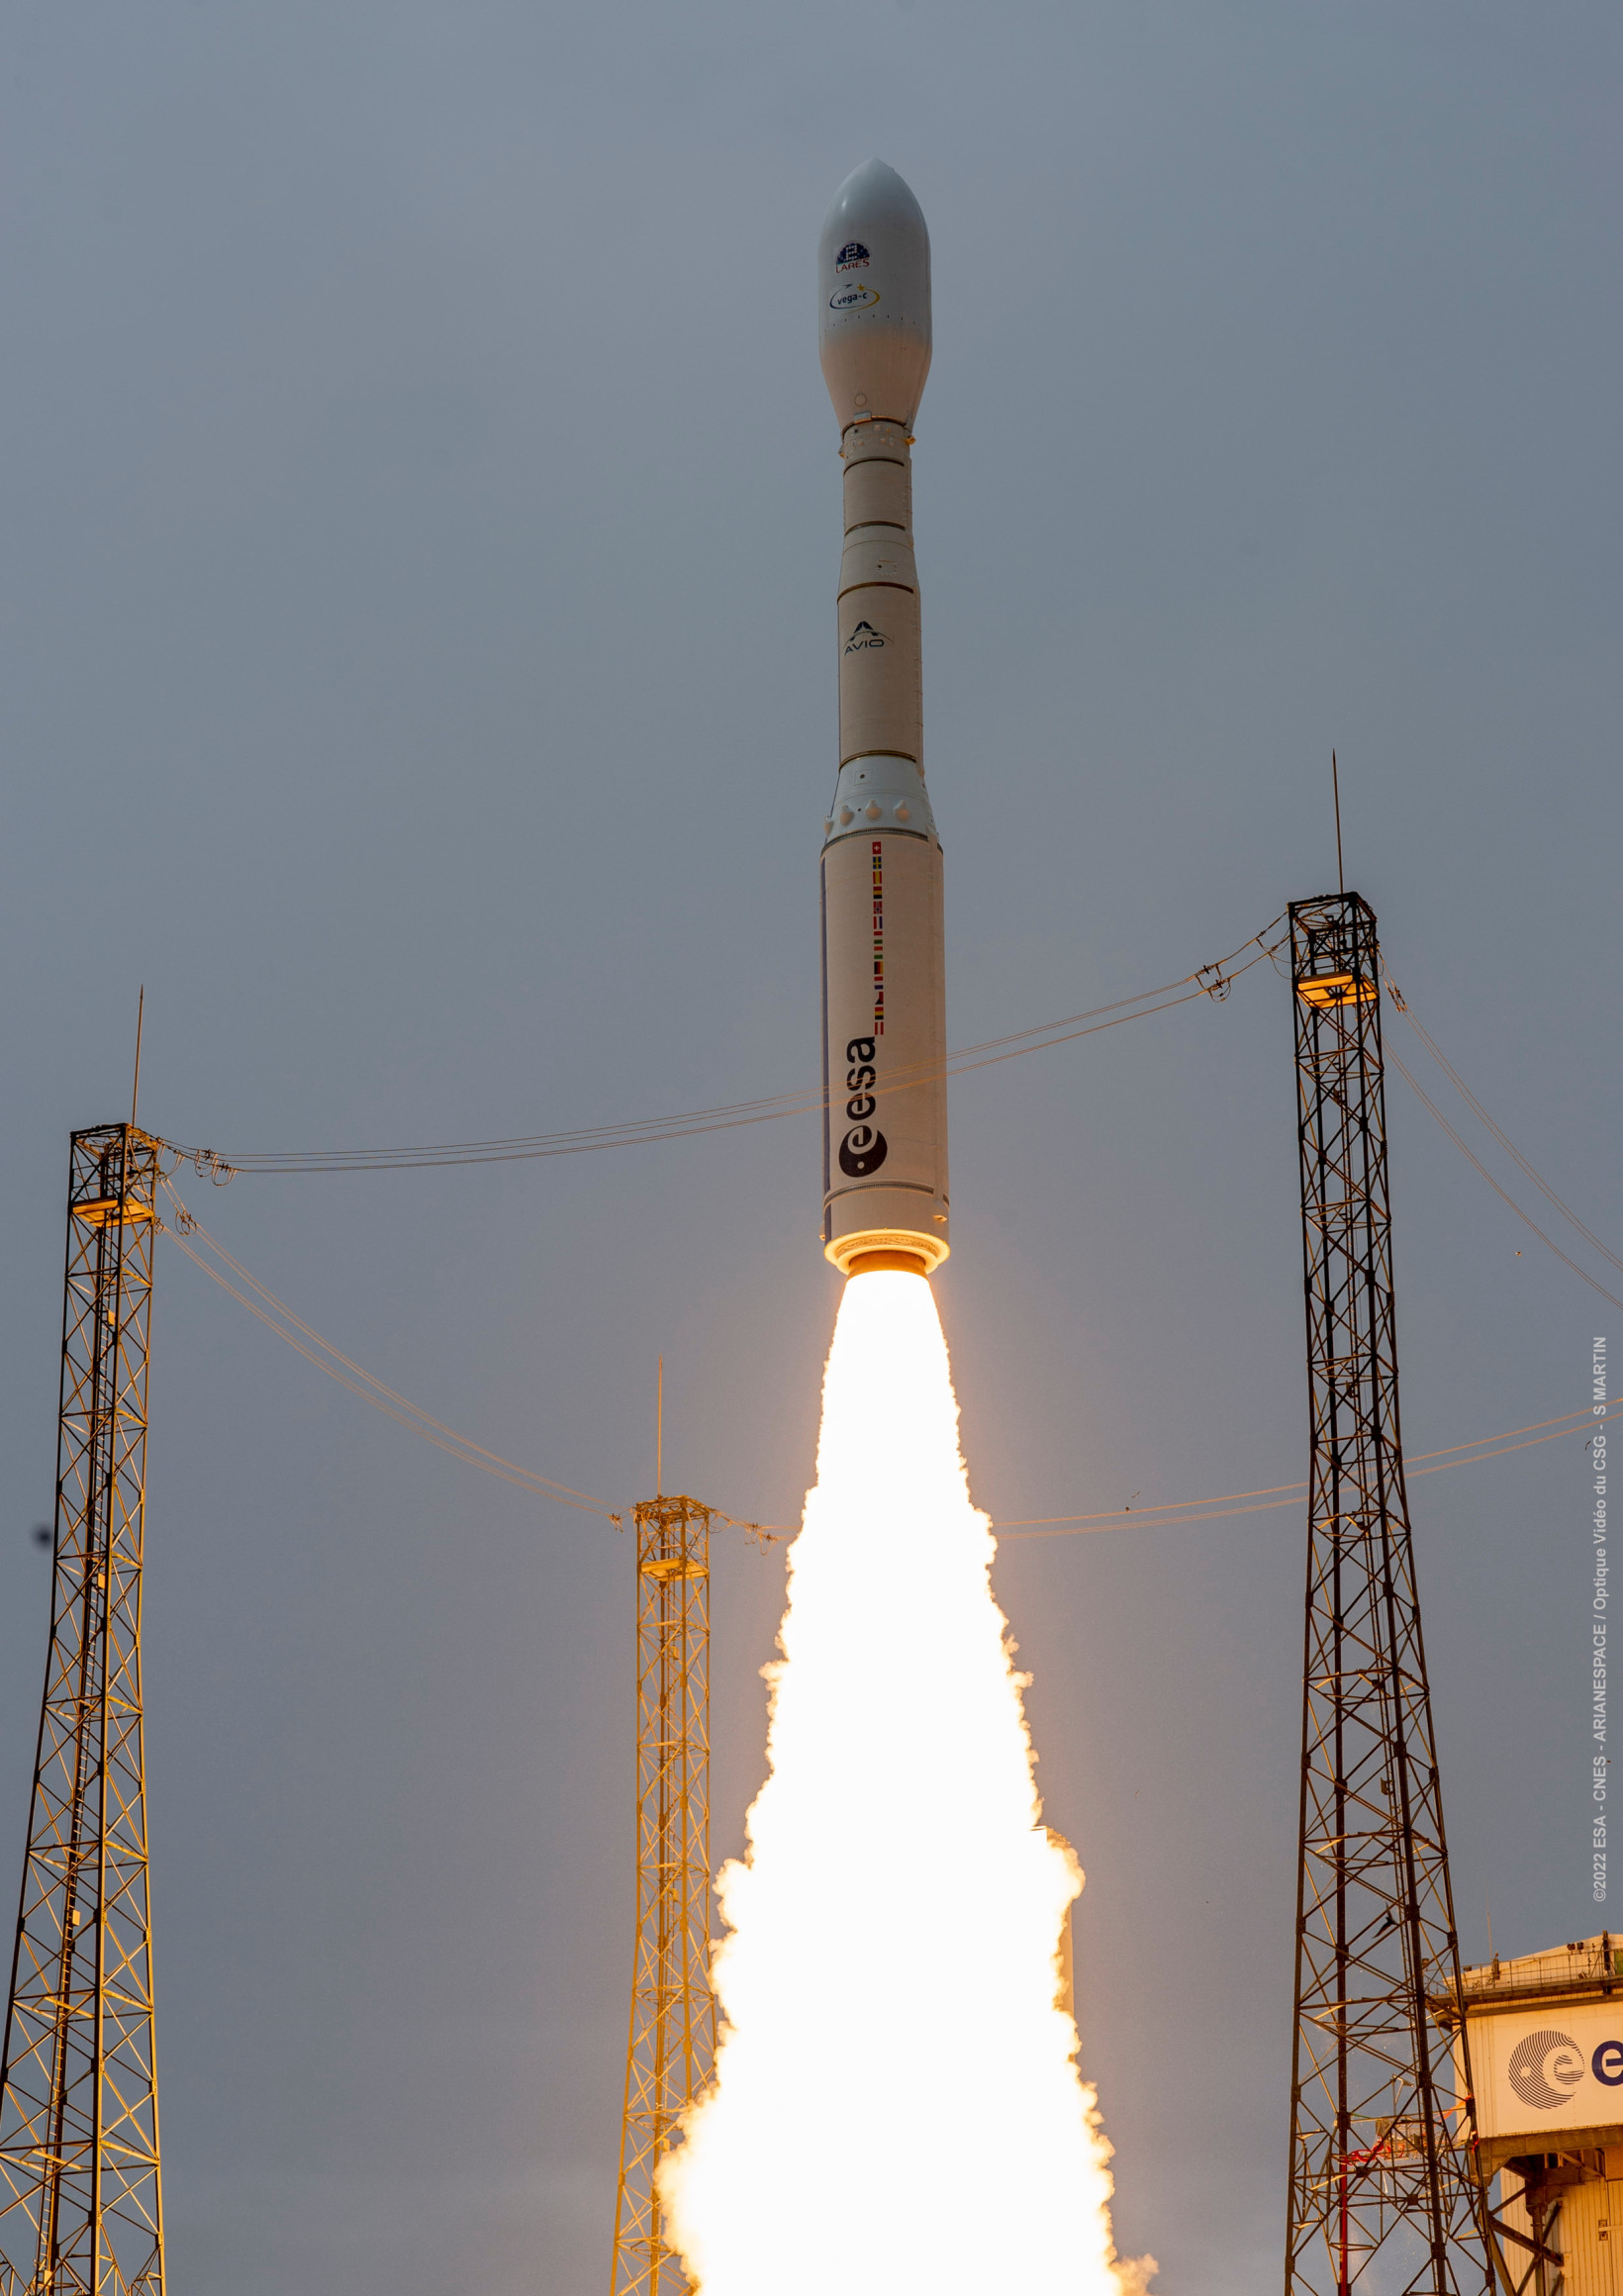 Vega-C lifts off for the first time